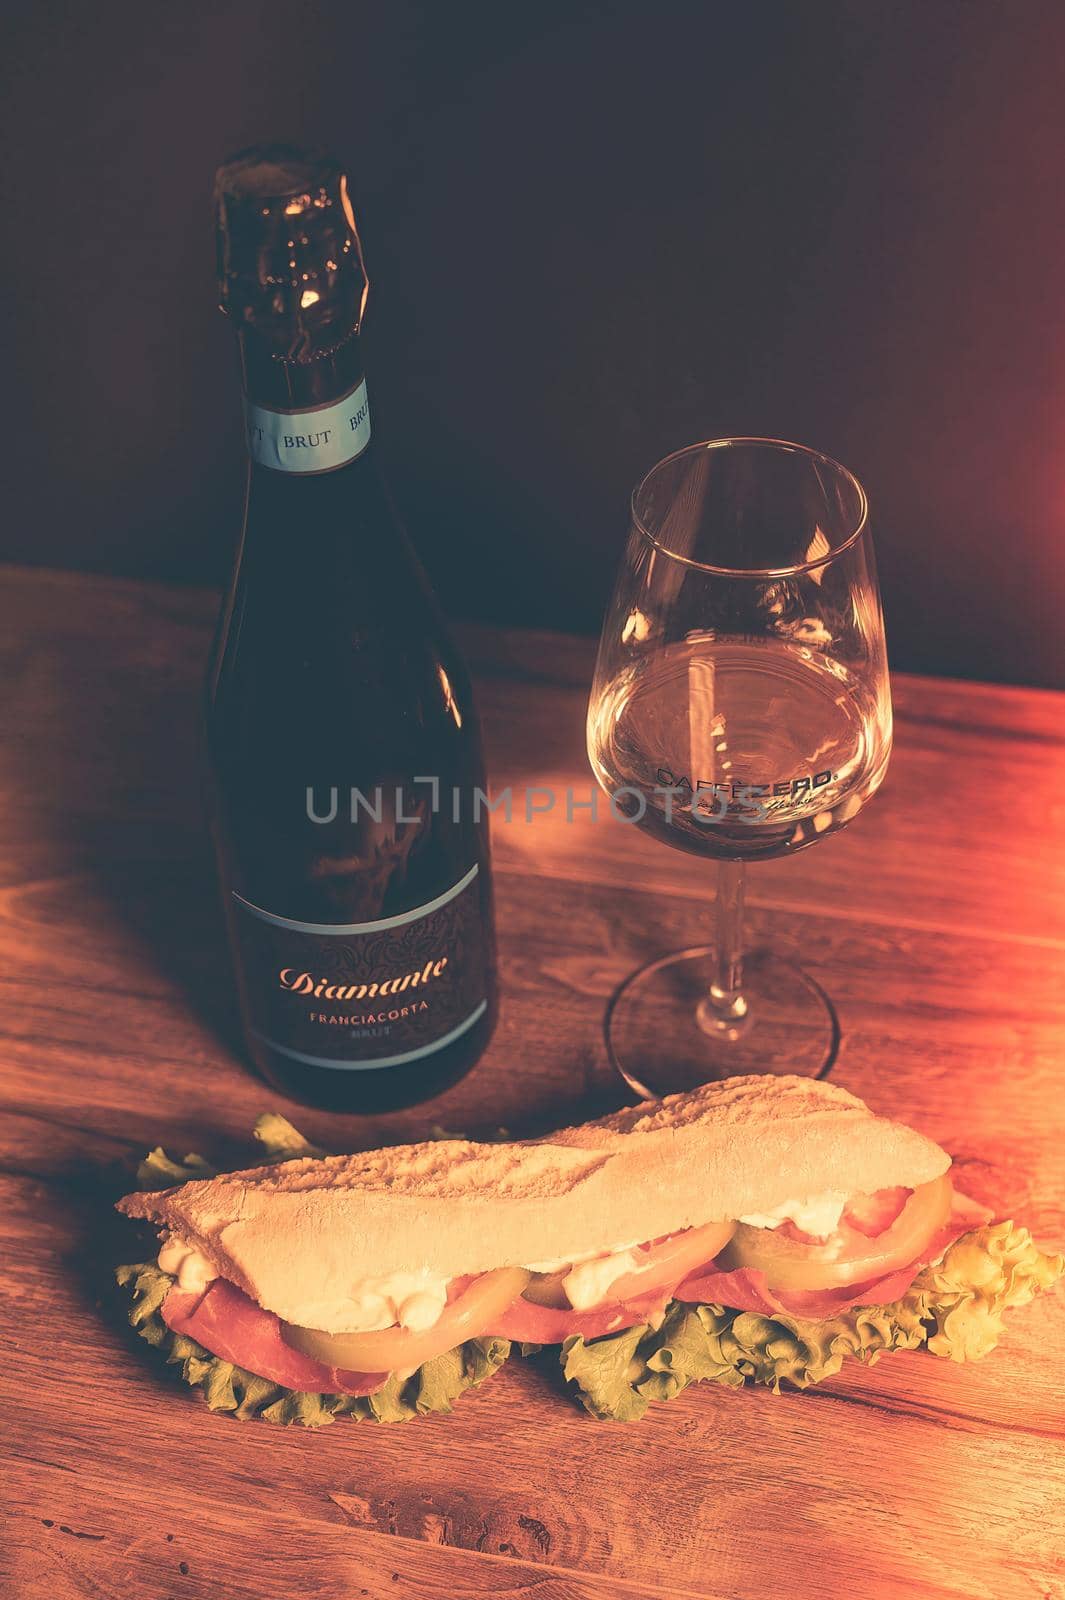 terni.italy october 25 2021:composition prosecco wine and sandwich with a glass